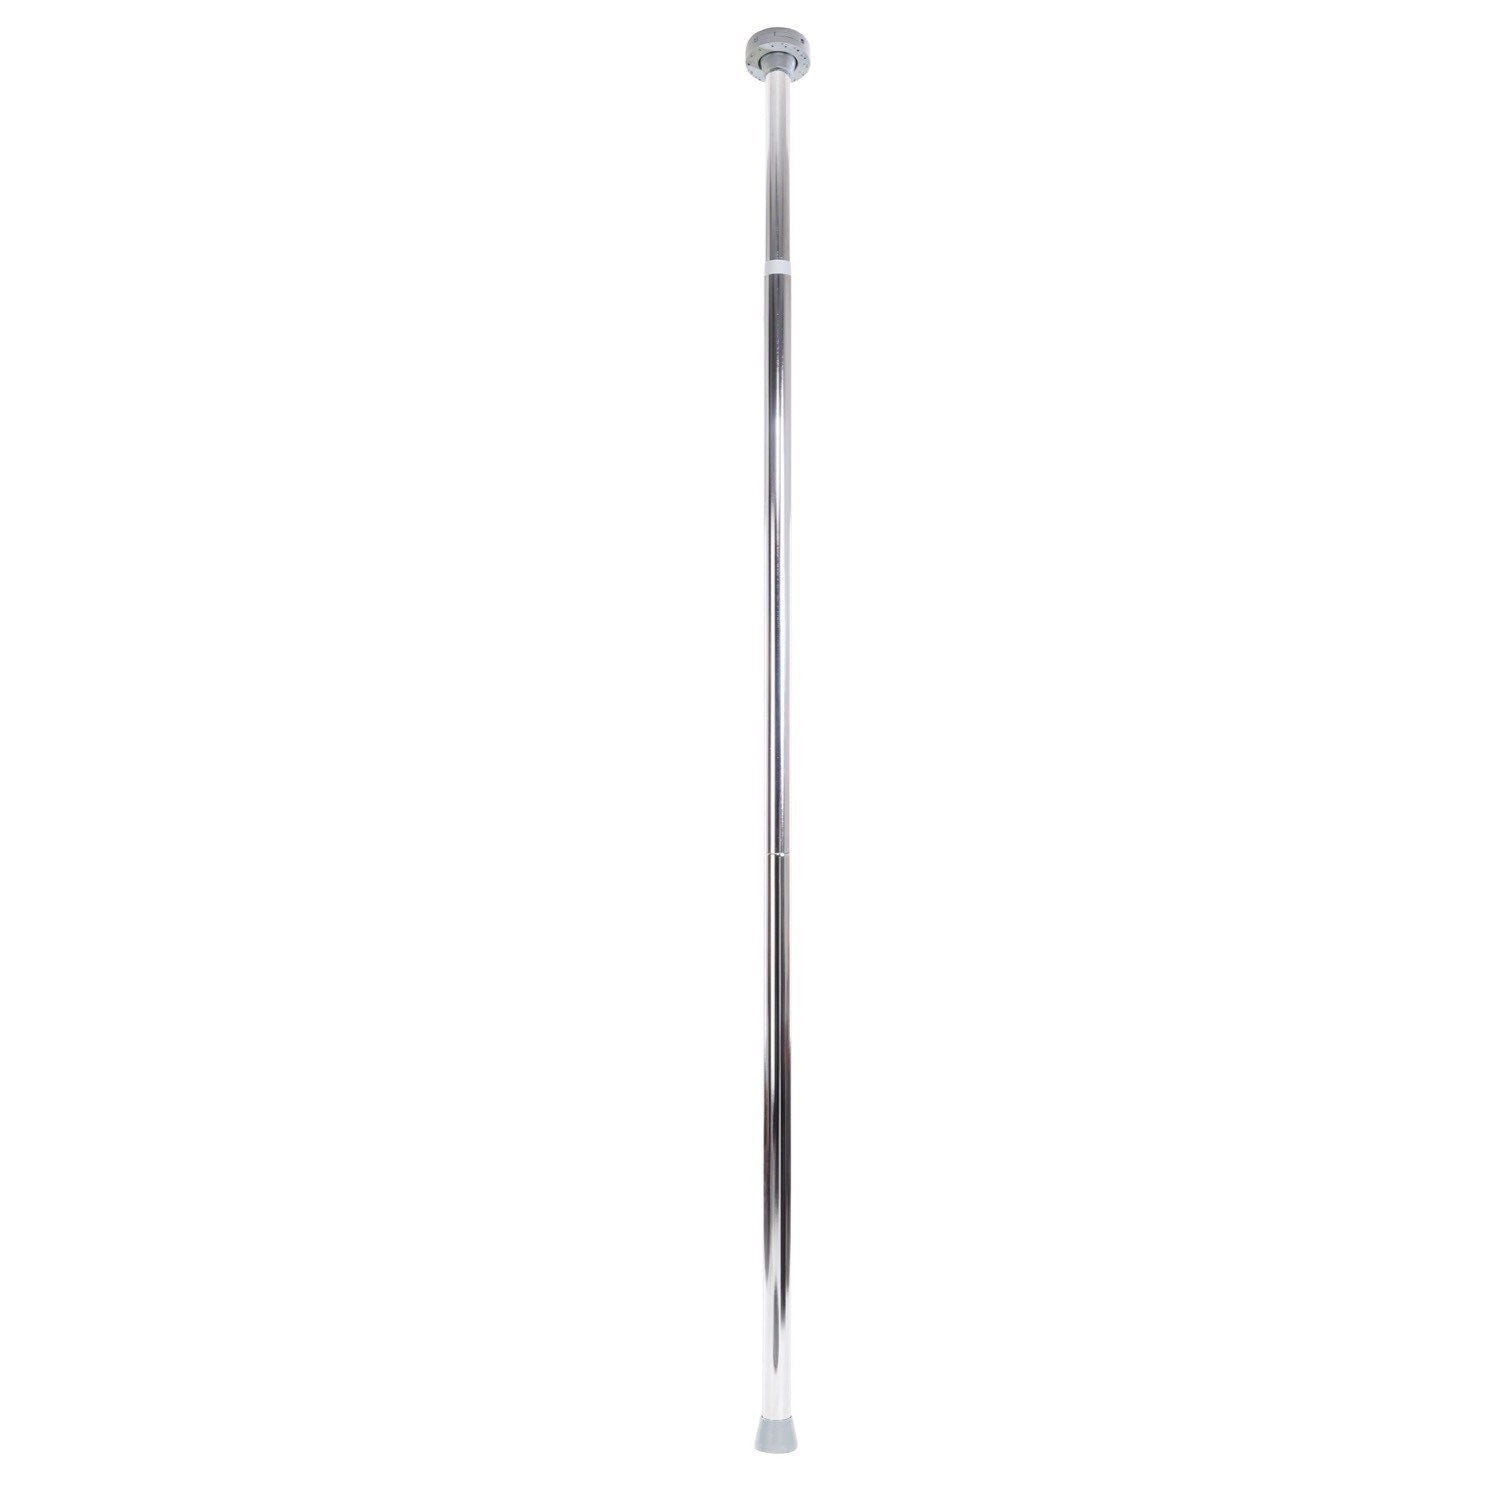 Fetish Fantasy Series Light-Up Disco Dance Pole - Dance Pole with Lights by Pipedream